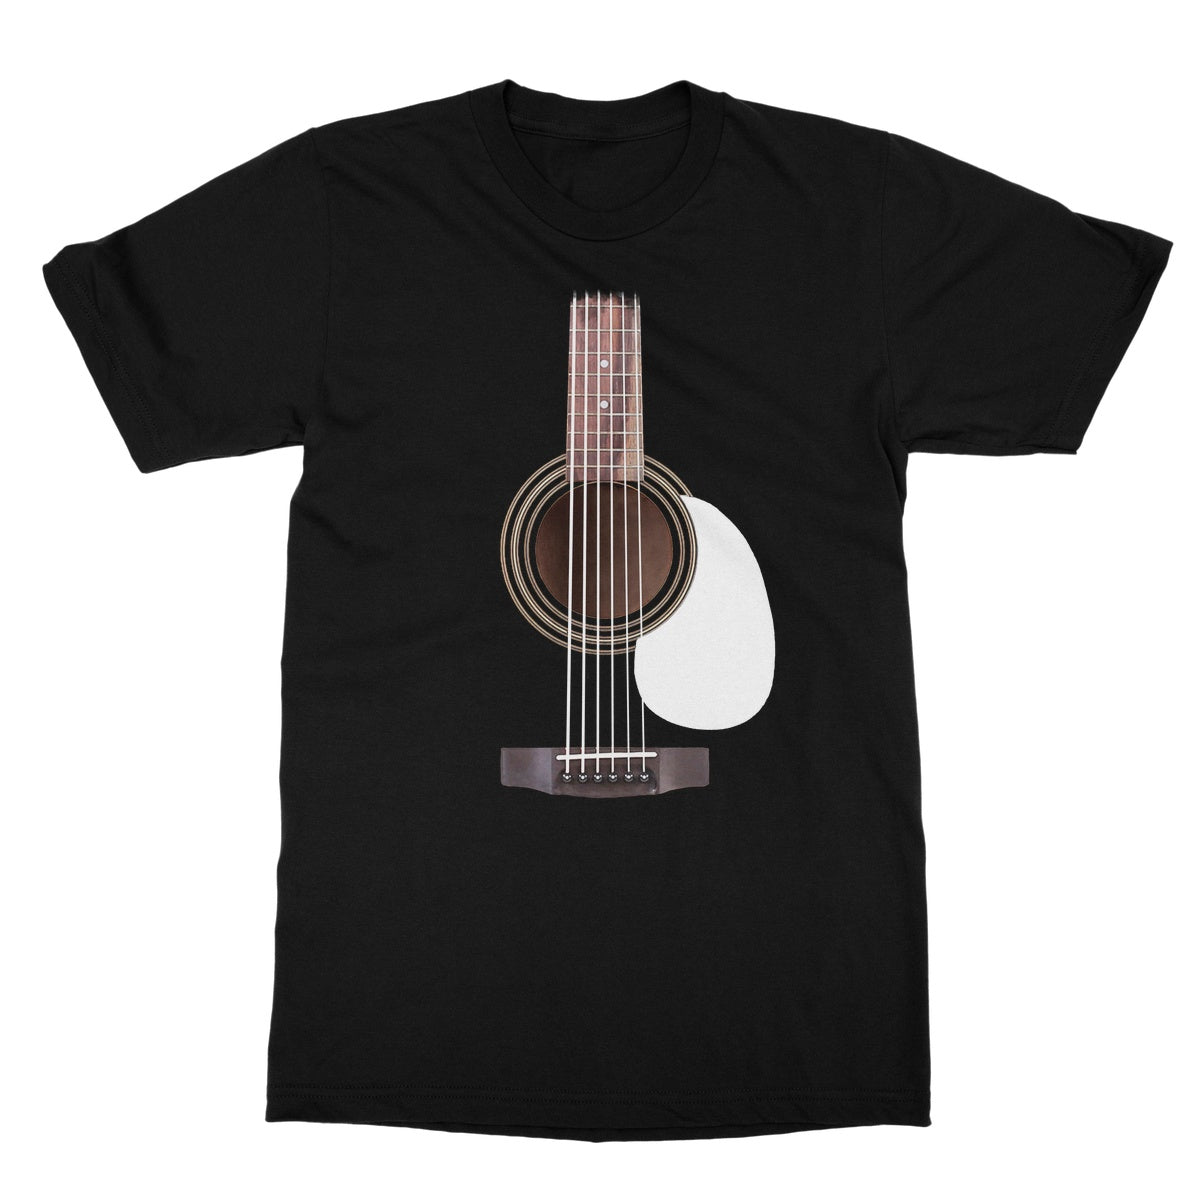 Guitar Neck and Strings T-Shirt